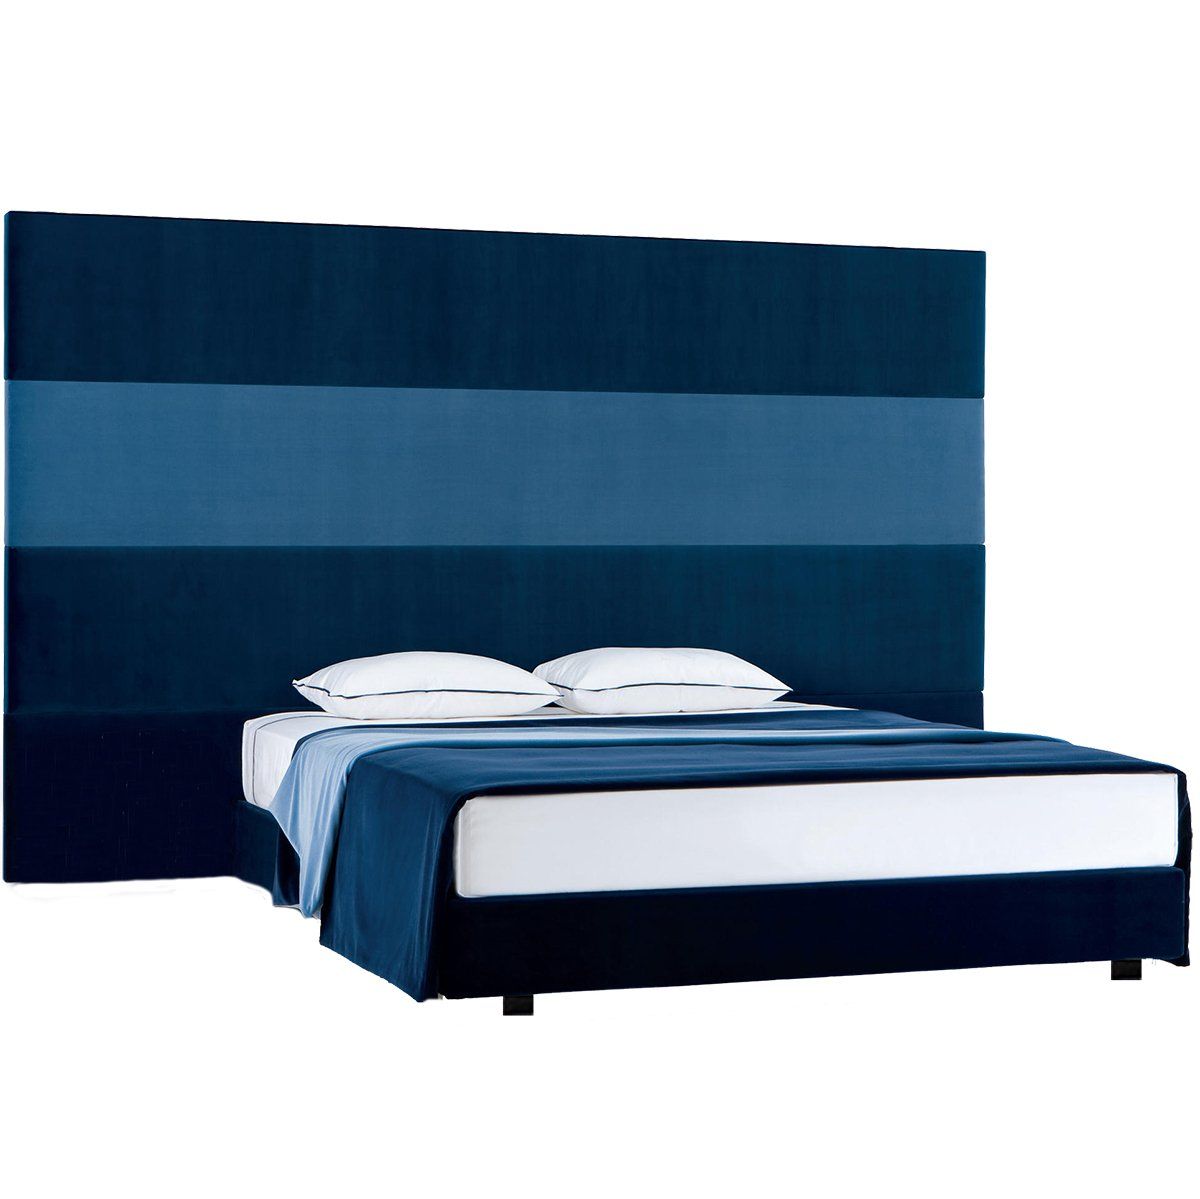 Double Bed 160x200 Blue Headboard Play